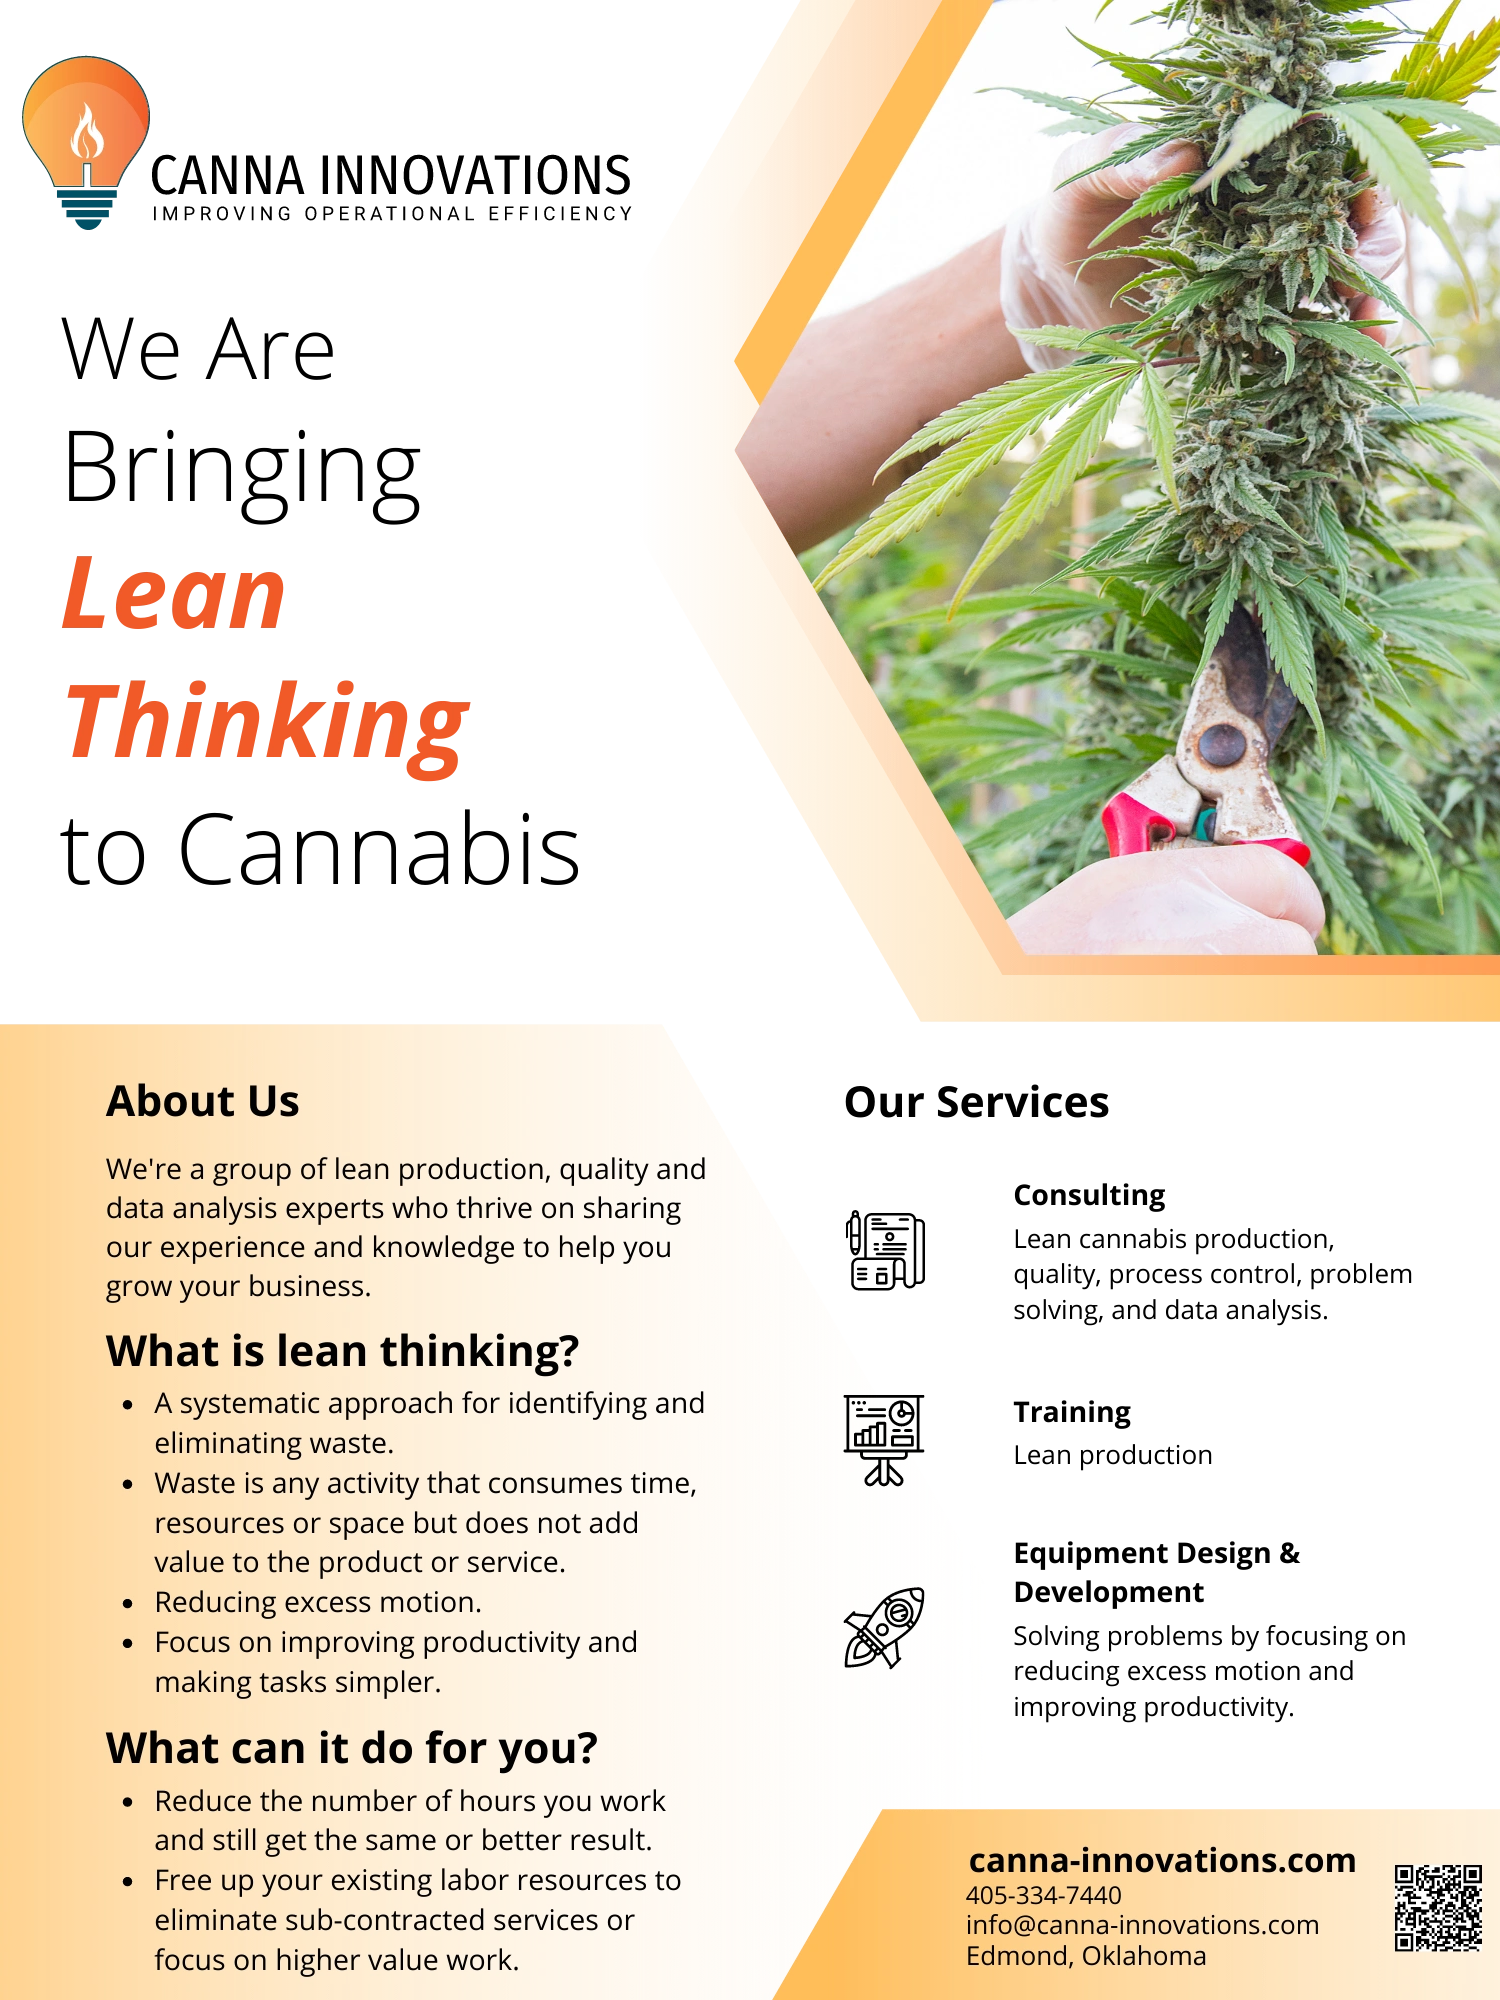 Lean, efficiency consulting for cannabis